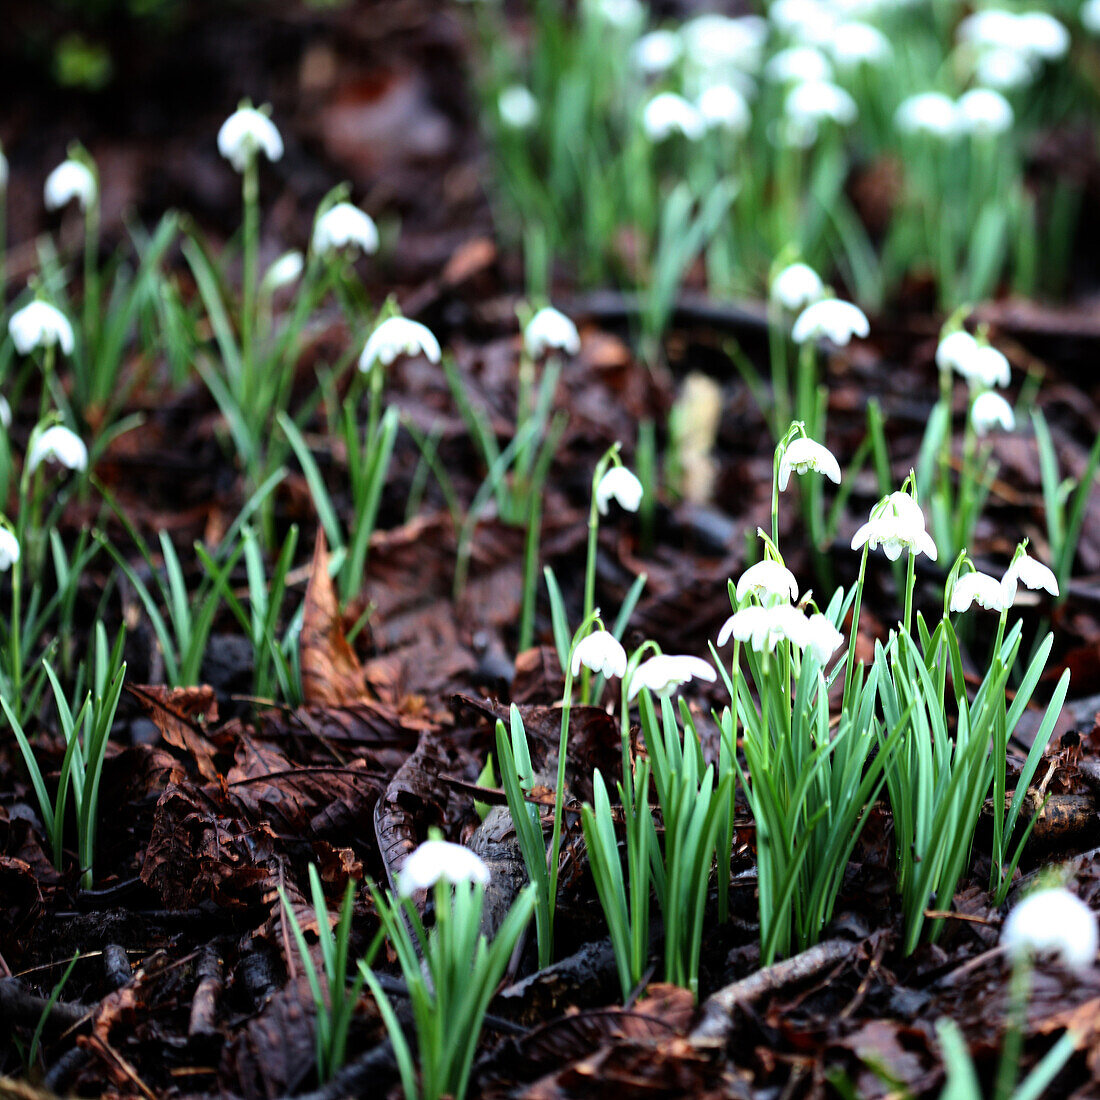 beautiful snowdrops first signs of spring.